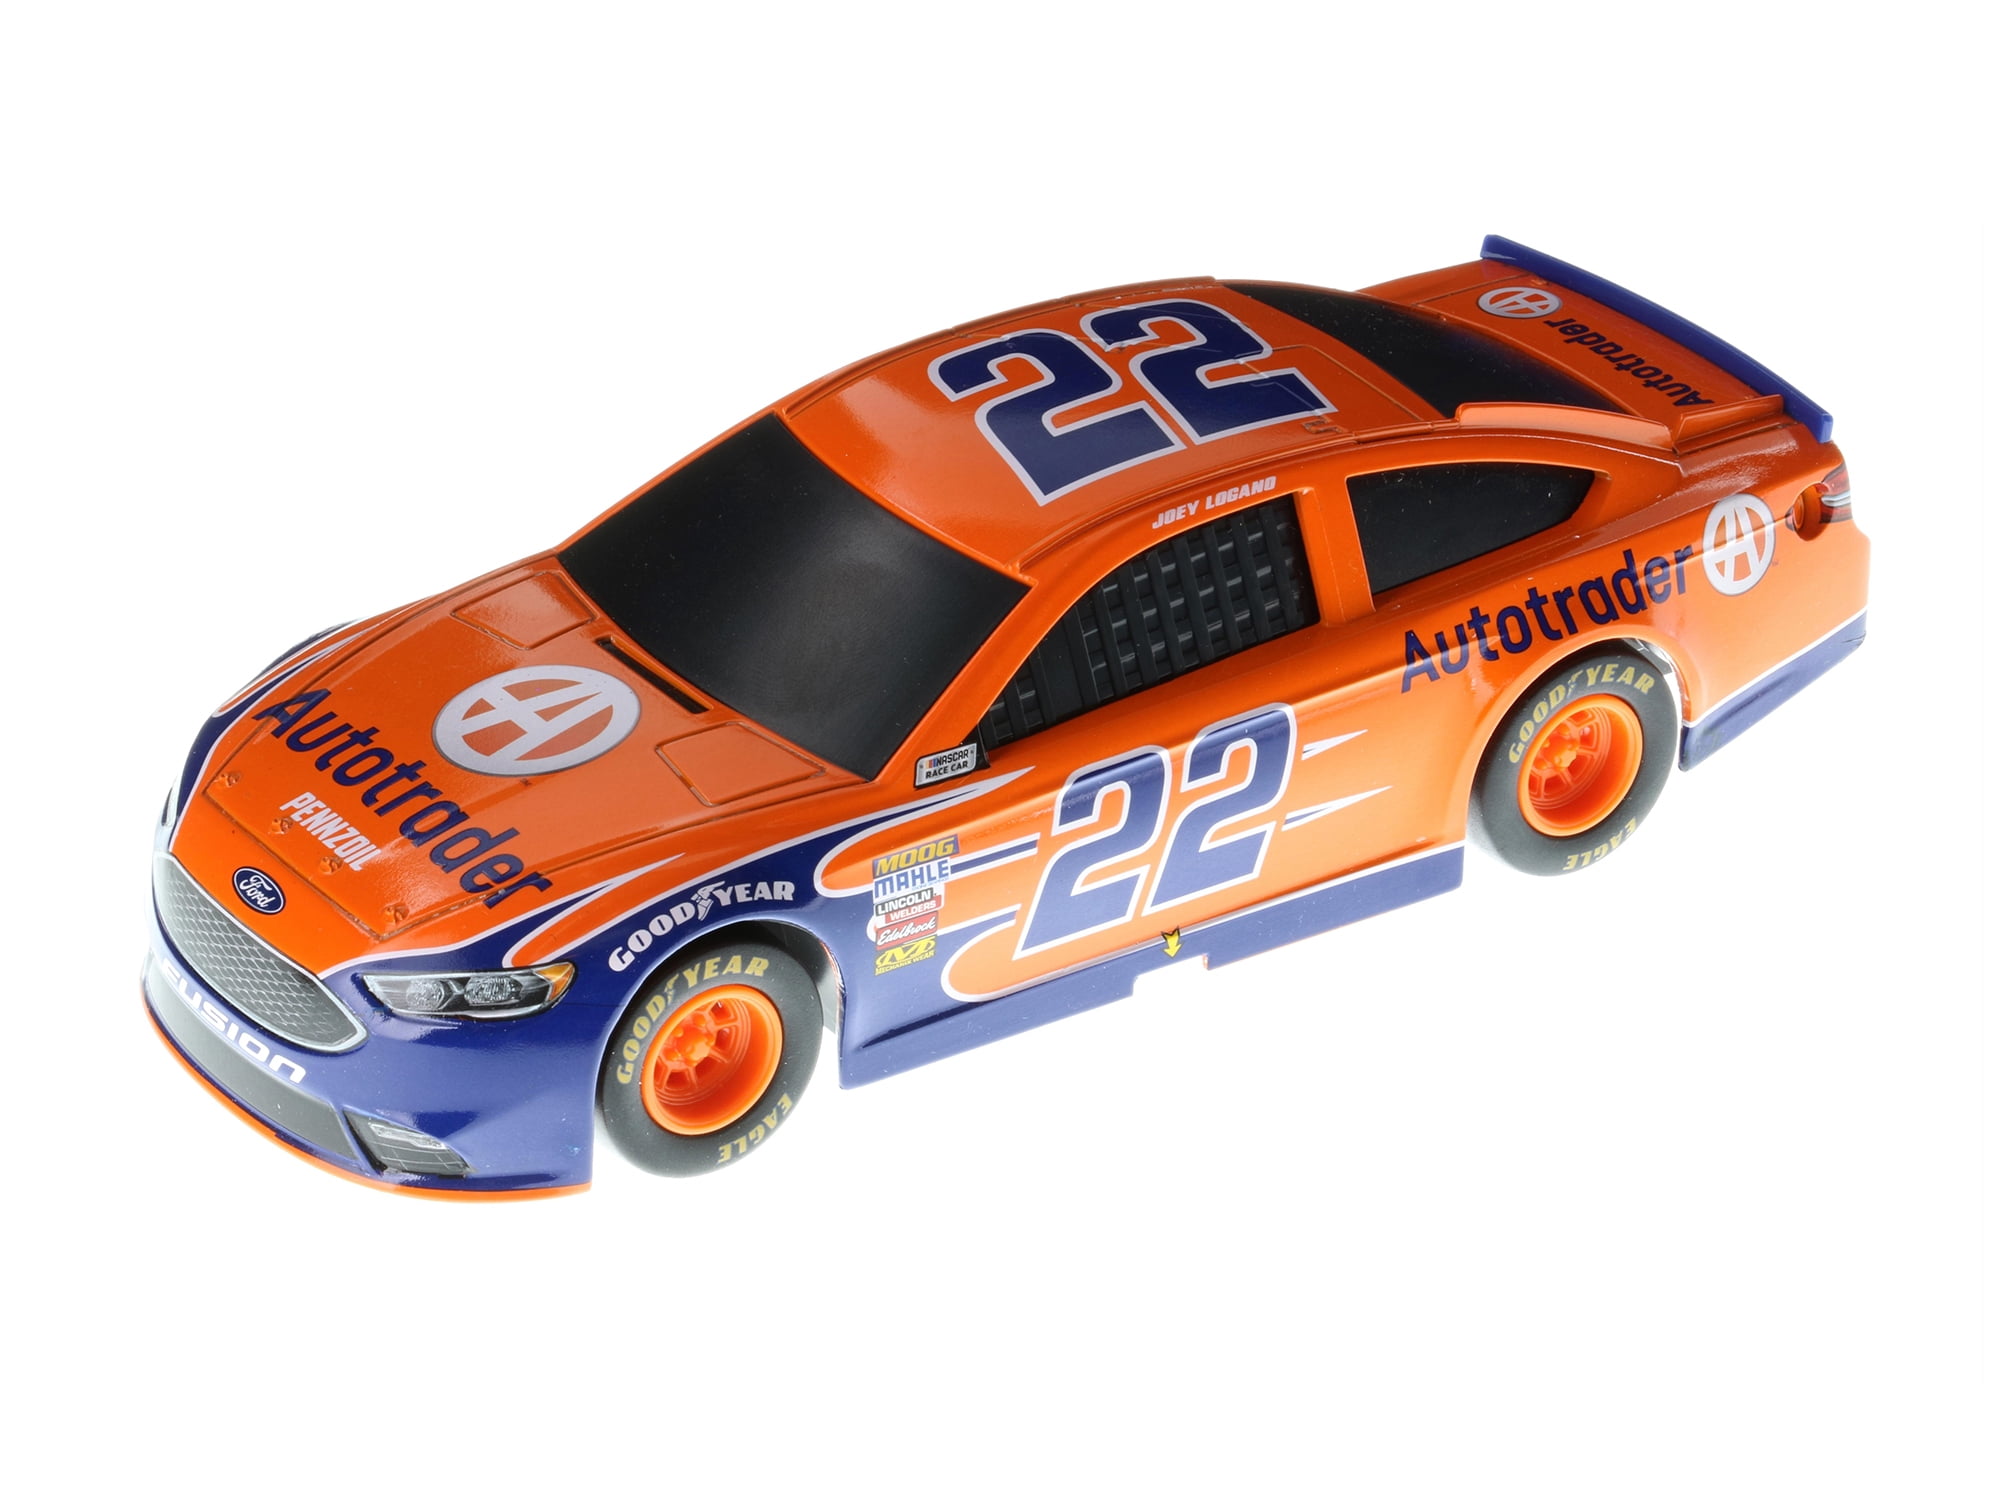 kings dugout Joey Logano #22 NASCAR Authentics AAA Insurance 1/64 Scale Die-Cast 2020 Wave 2 Release.